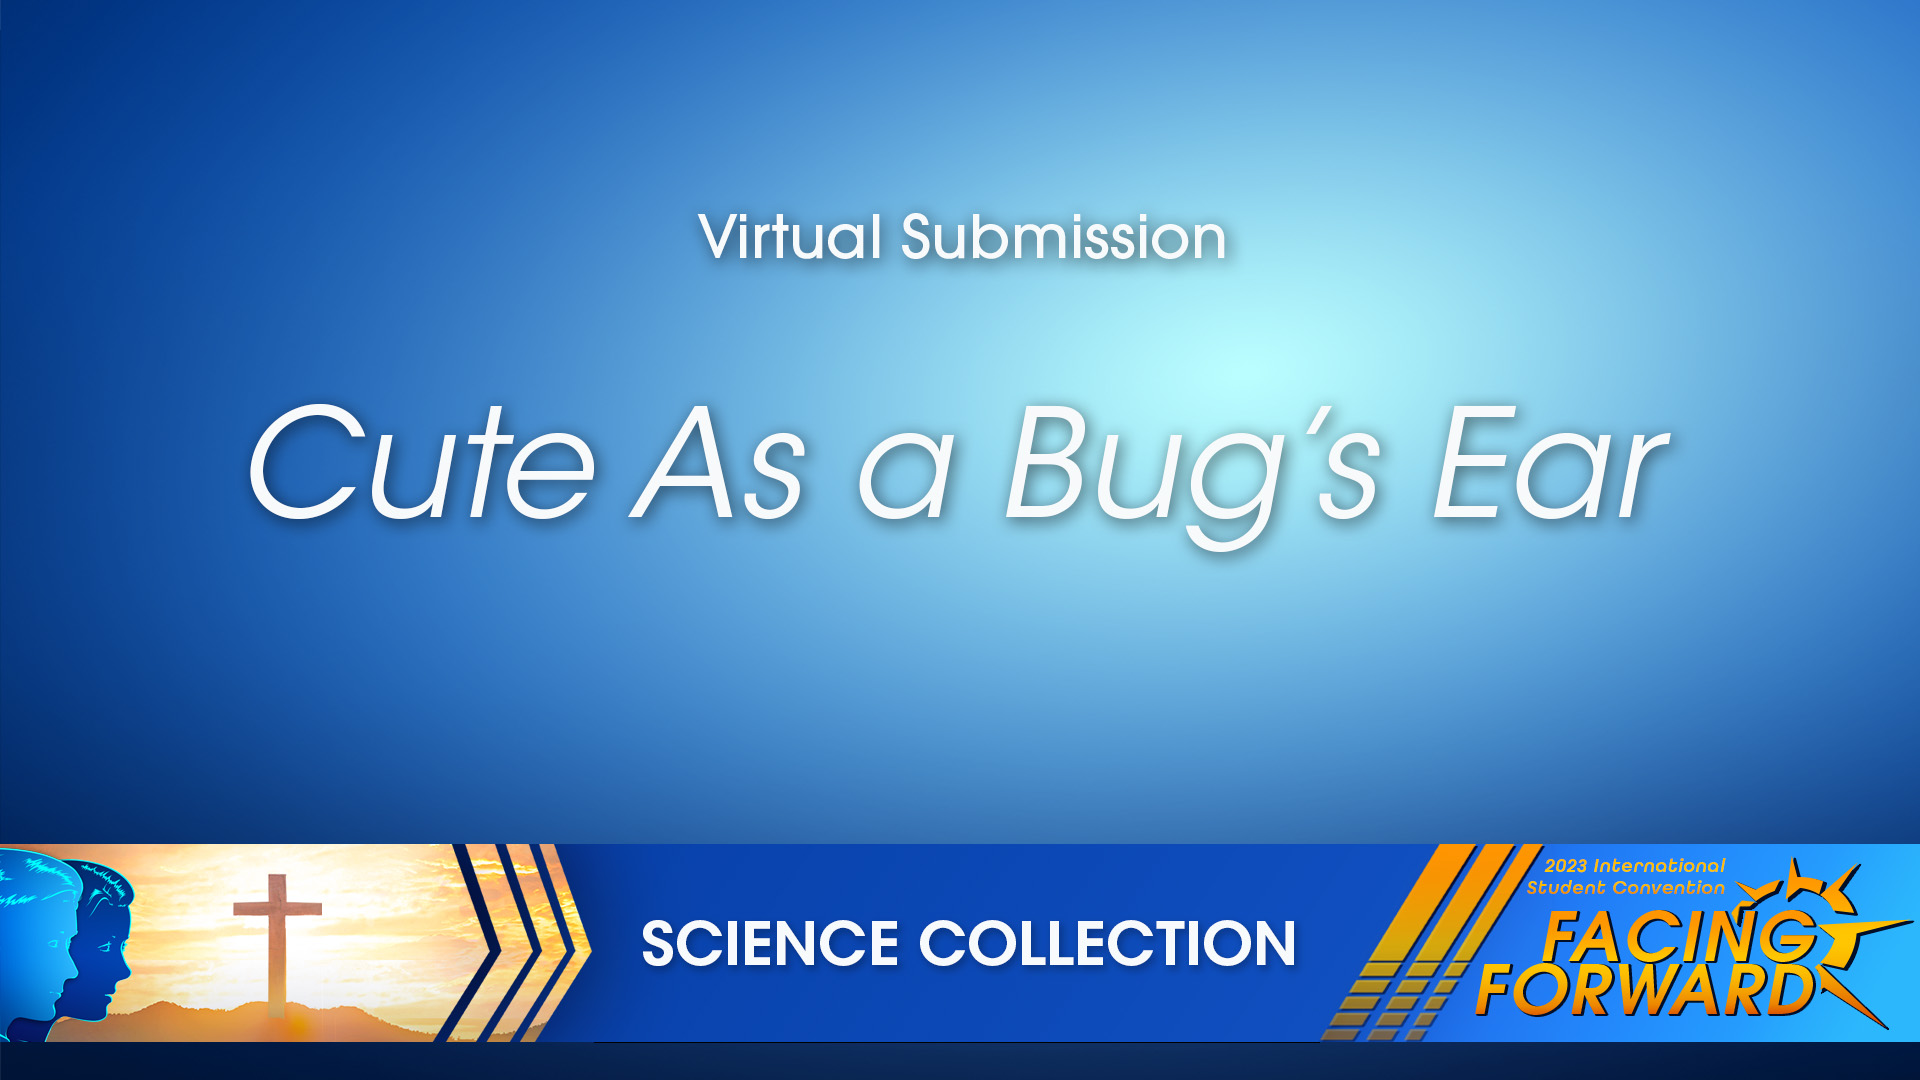 Science Collection, "Cute As a Bug's Ear" - ISC 2023